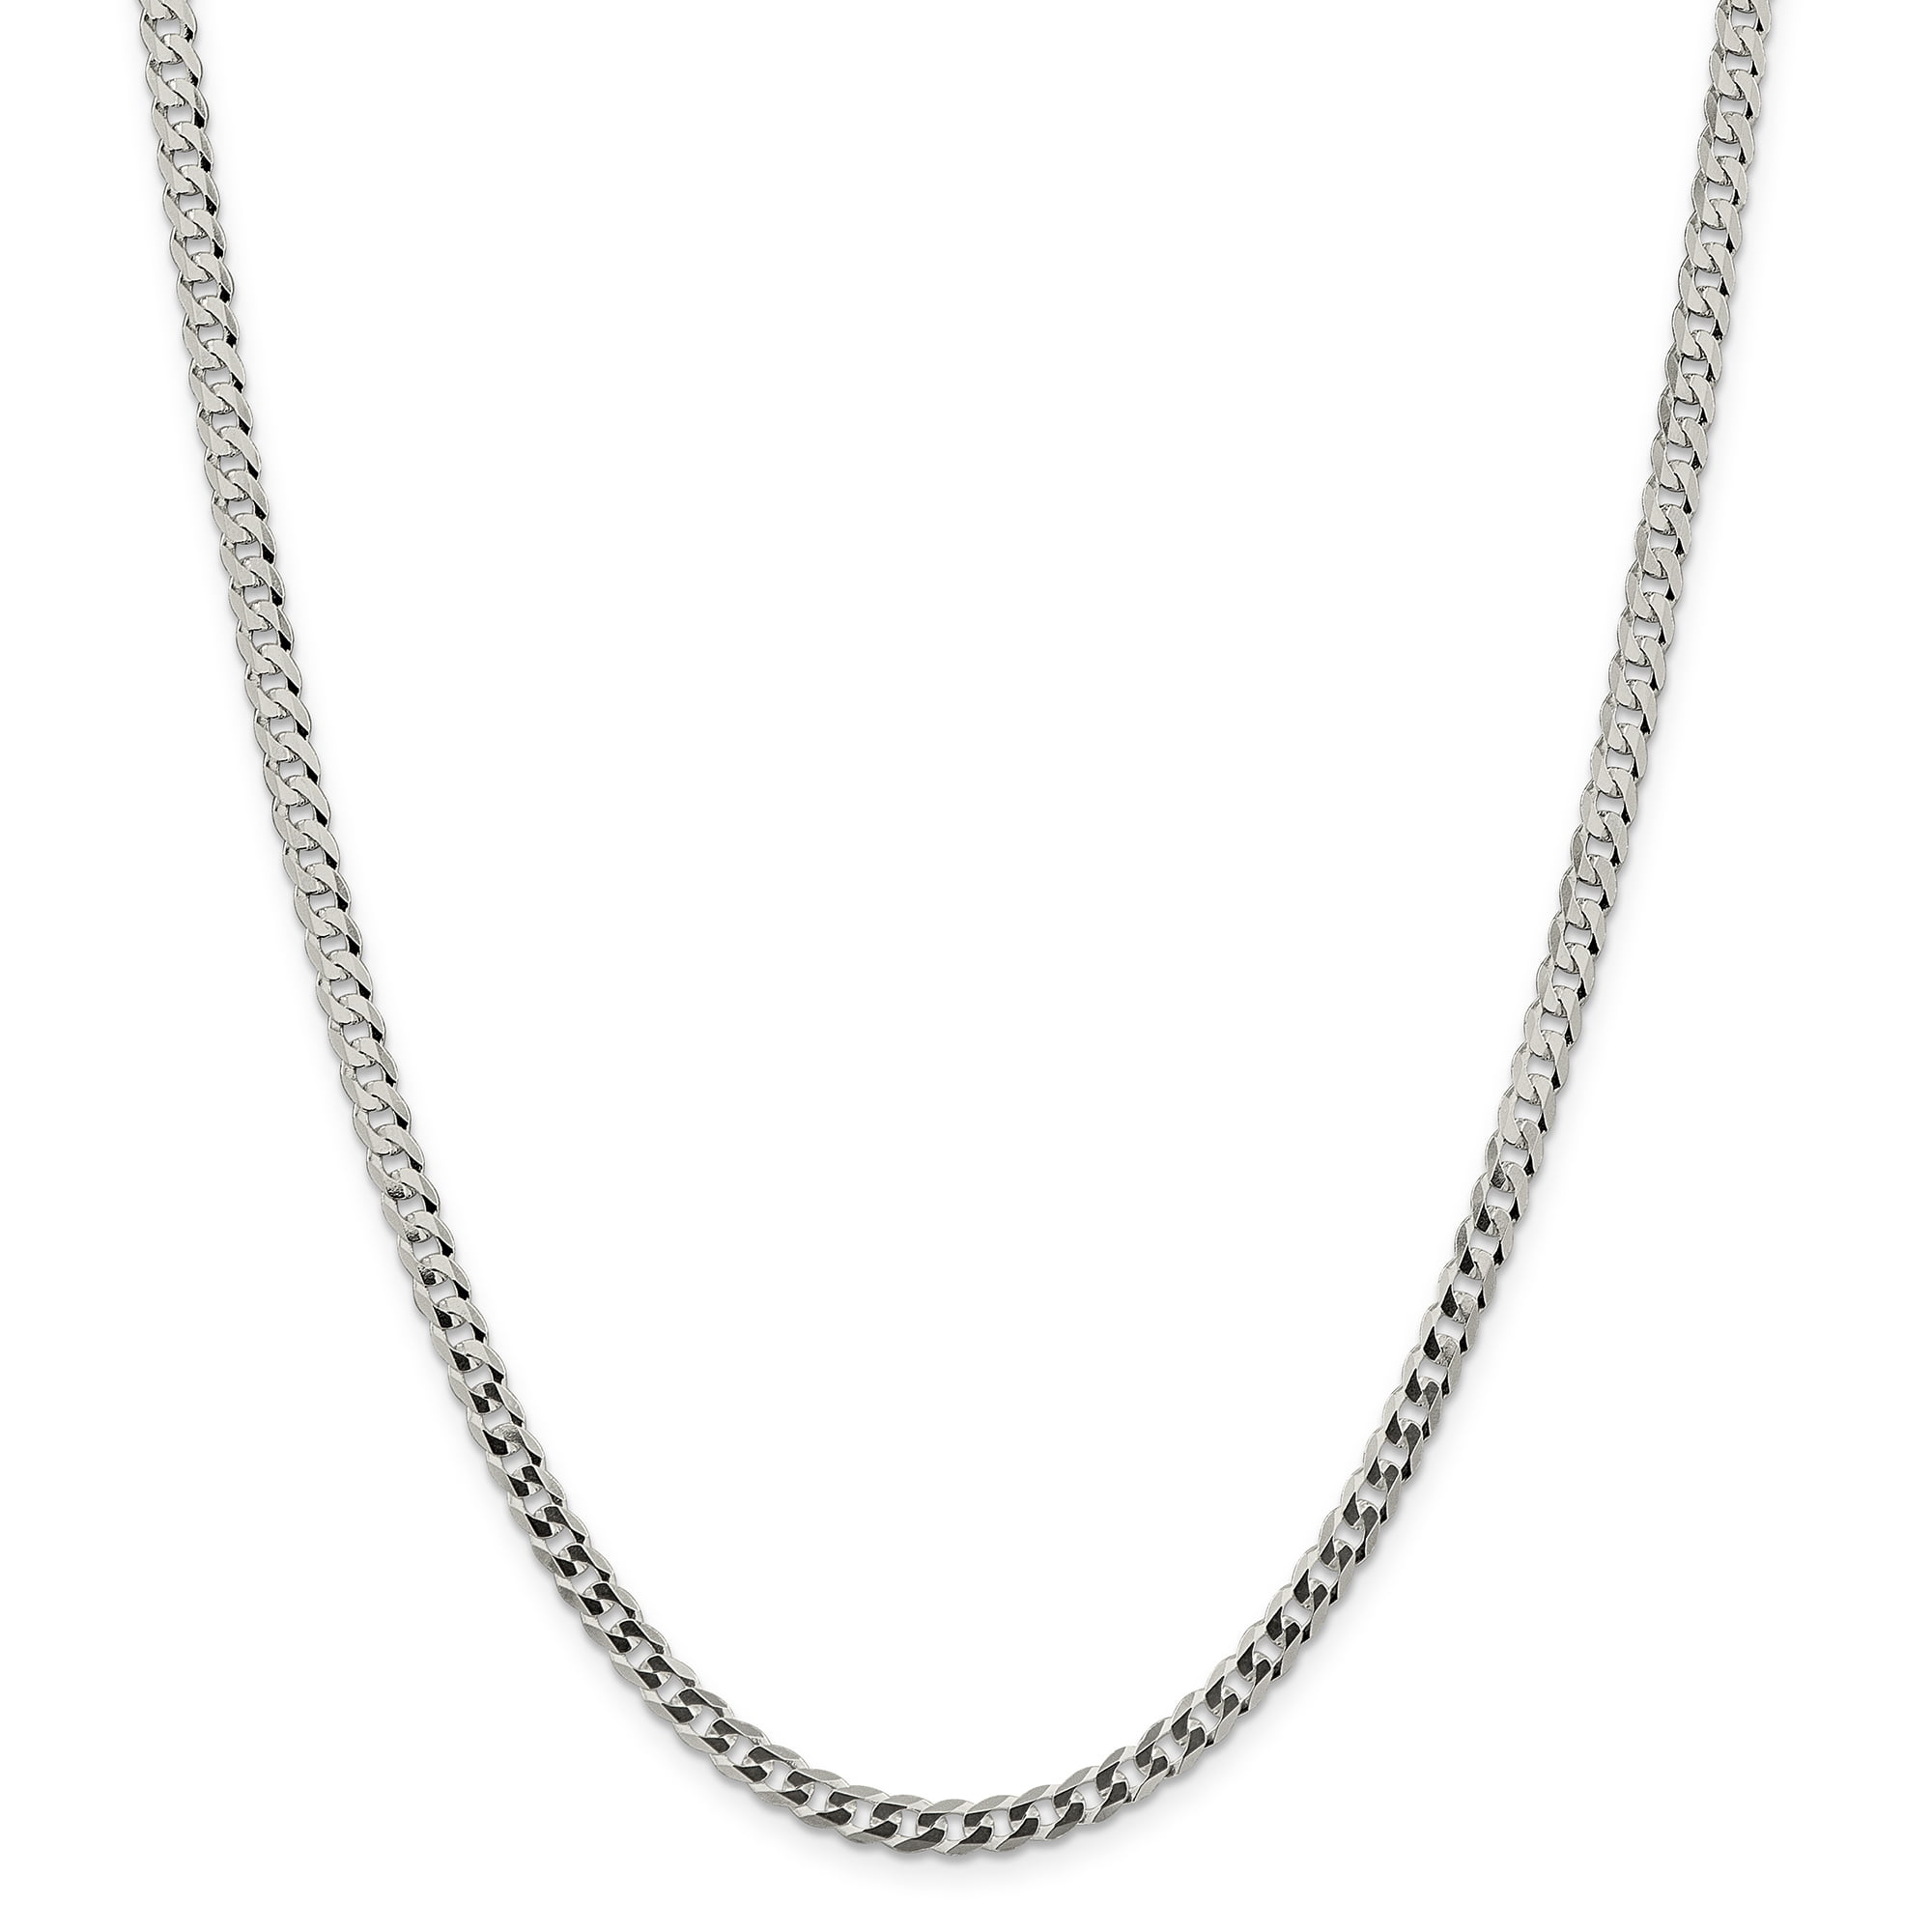 Sterling Silver Figaro Link Chain Necklace 4.5mm Pave Cut Beveled Nickel Free Italy 7-30 inch